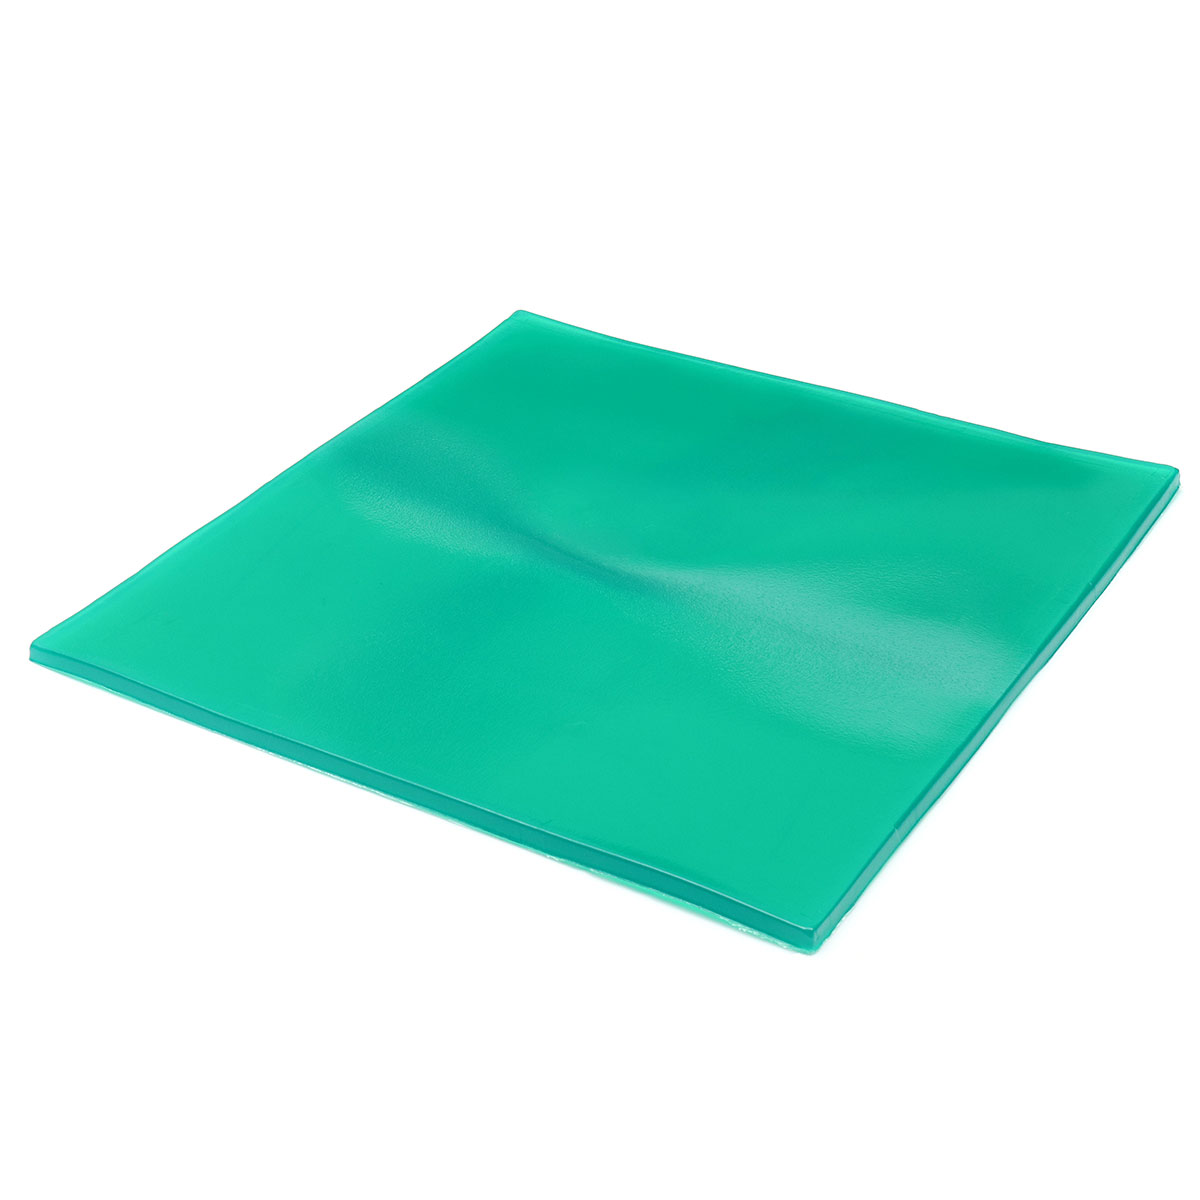 Cool Gel Pad Seat Green Square for Motorcycle Sofa Chair Home Office 45X45Cm